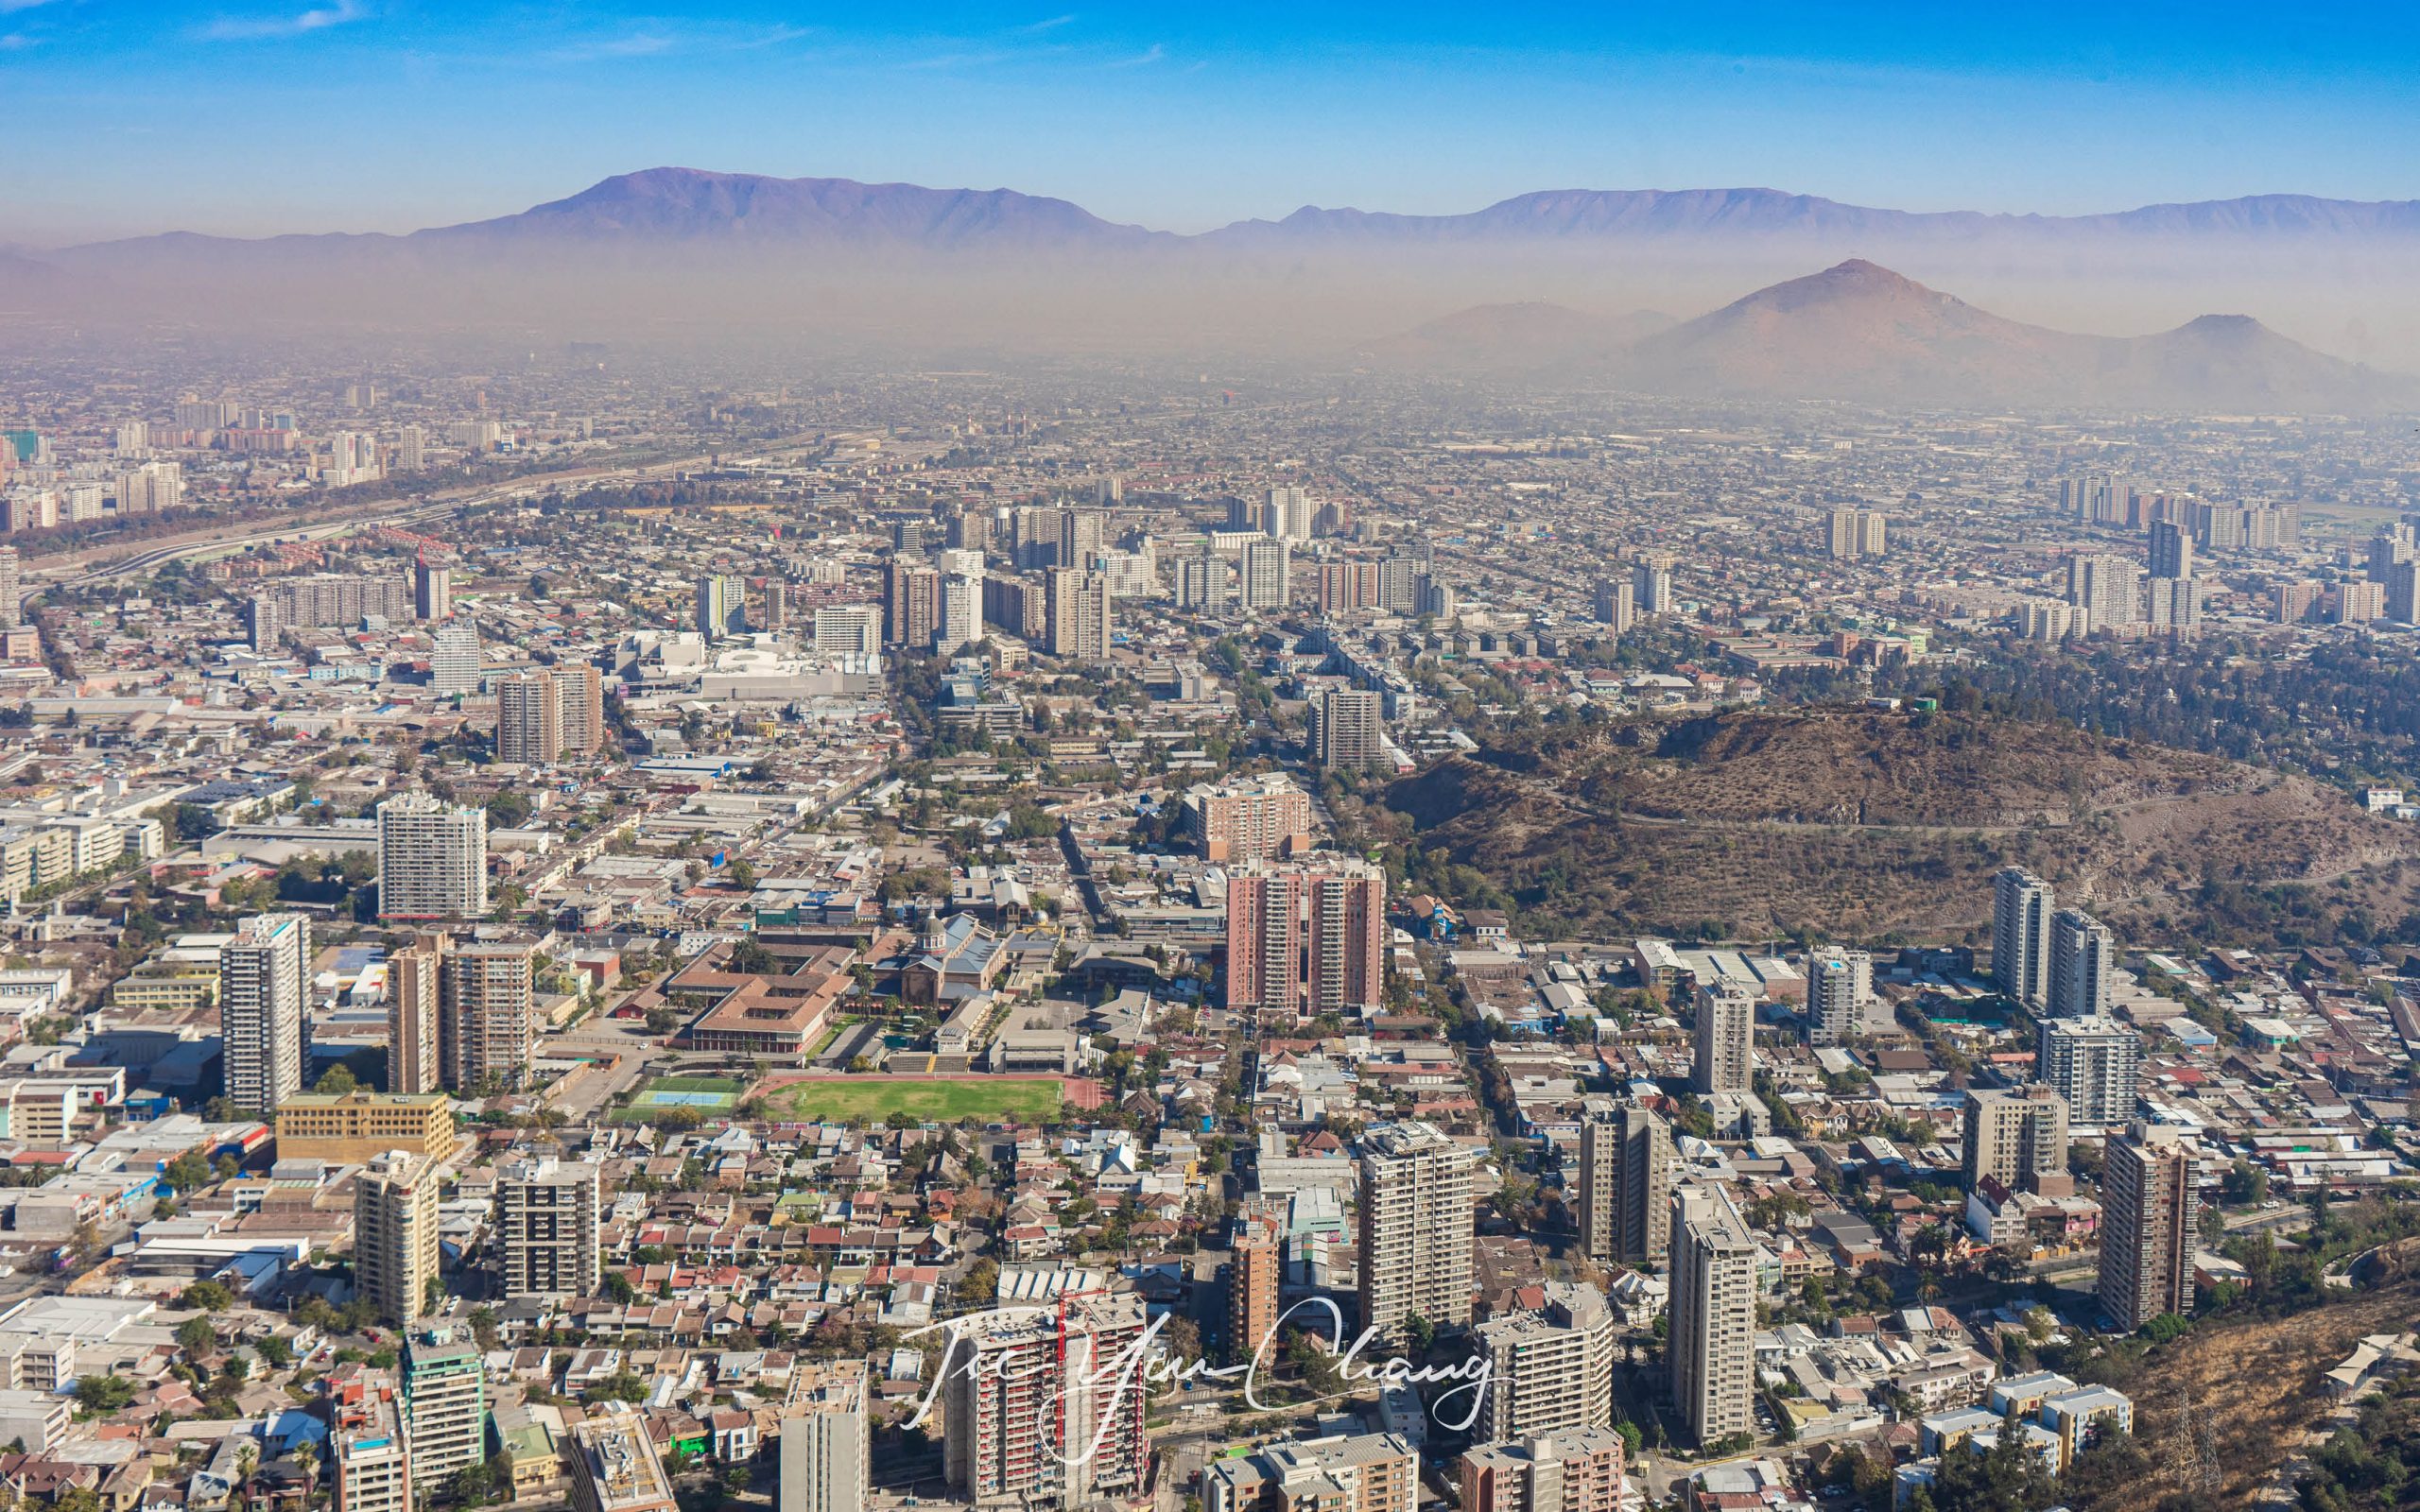 The best views over Santiago are from the peaks and viewpoints of Cerro San Cristobal